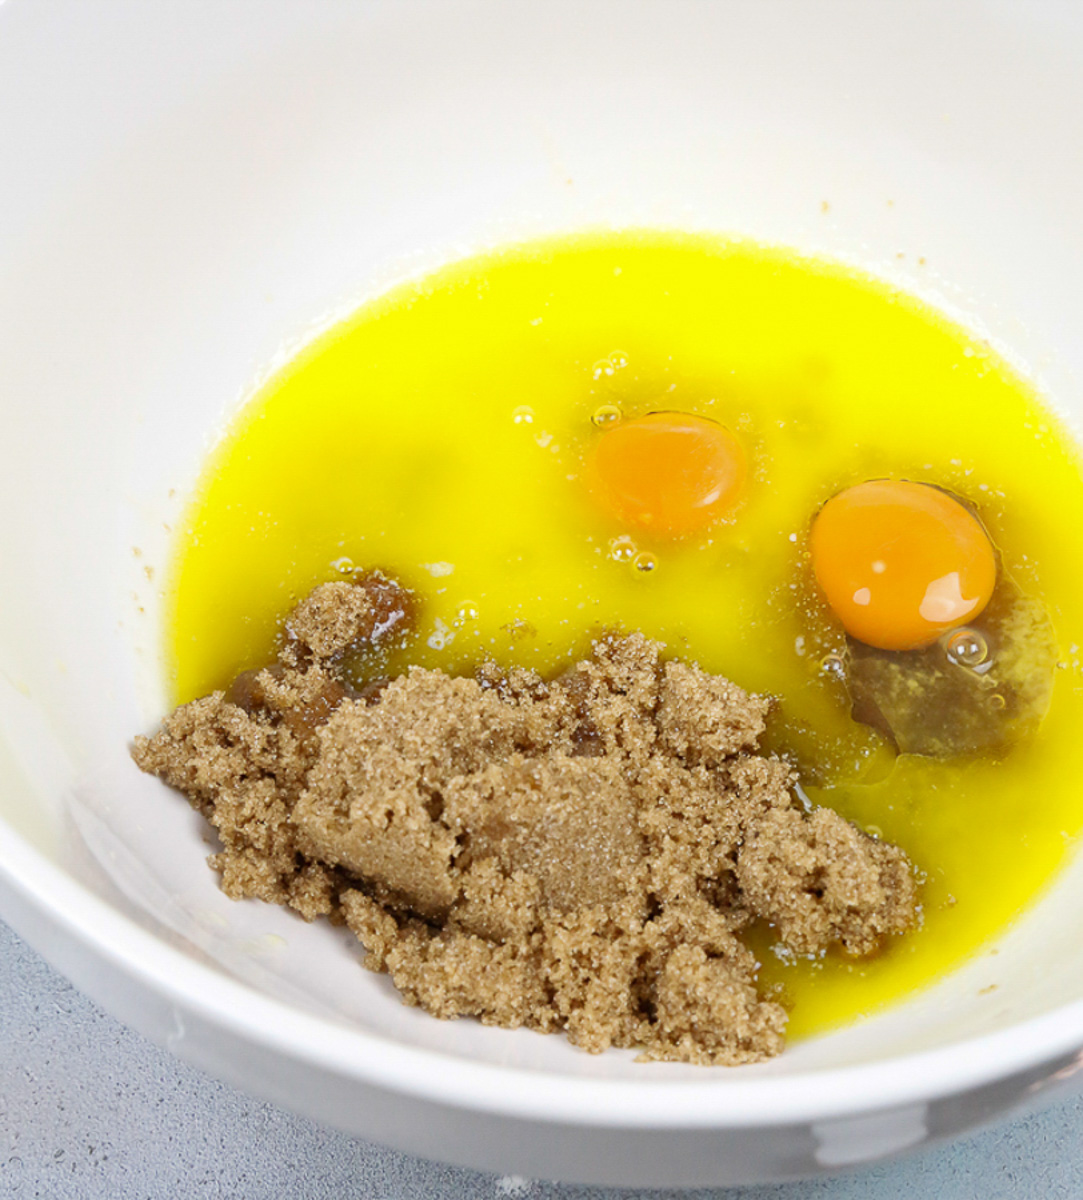 In a mixing bowl, combine the coconut sugar, melted butter, and vanilla extract and eggs in a bowl 